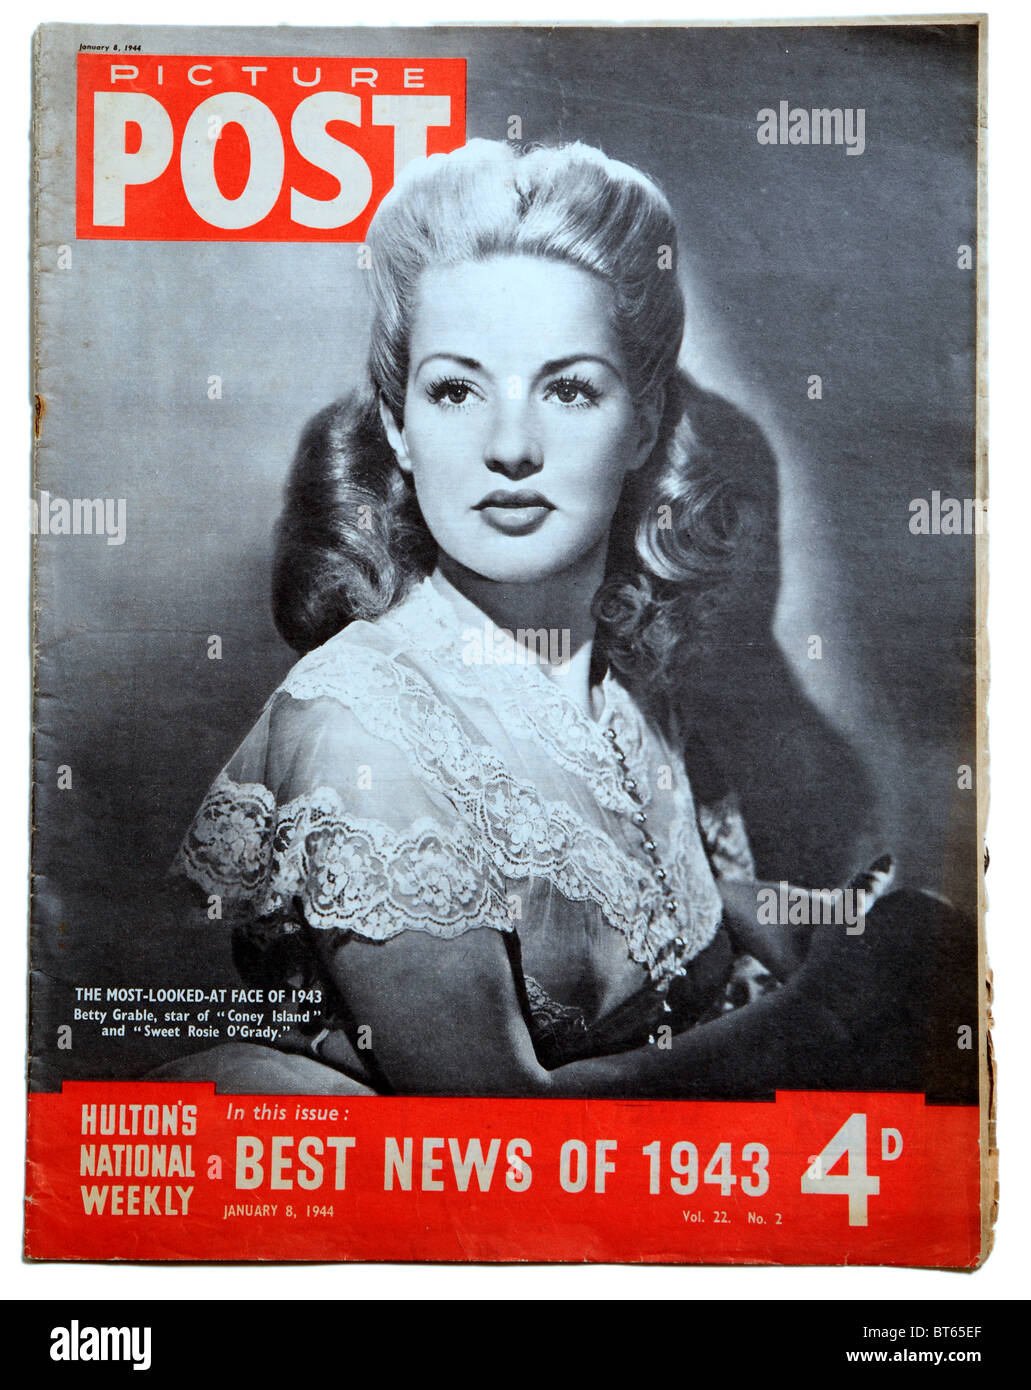 8 january 1944 betty grable coney island sweet rosie o'grady film star Picture Post prominent photojournalistic magazine publish Stock Photo